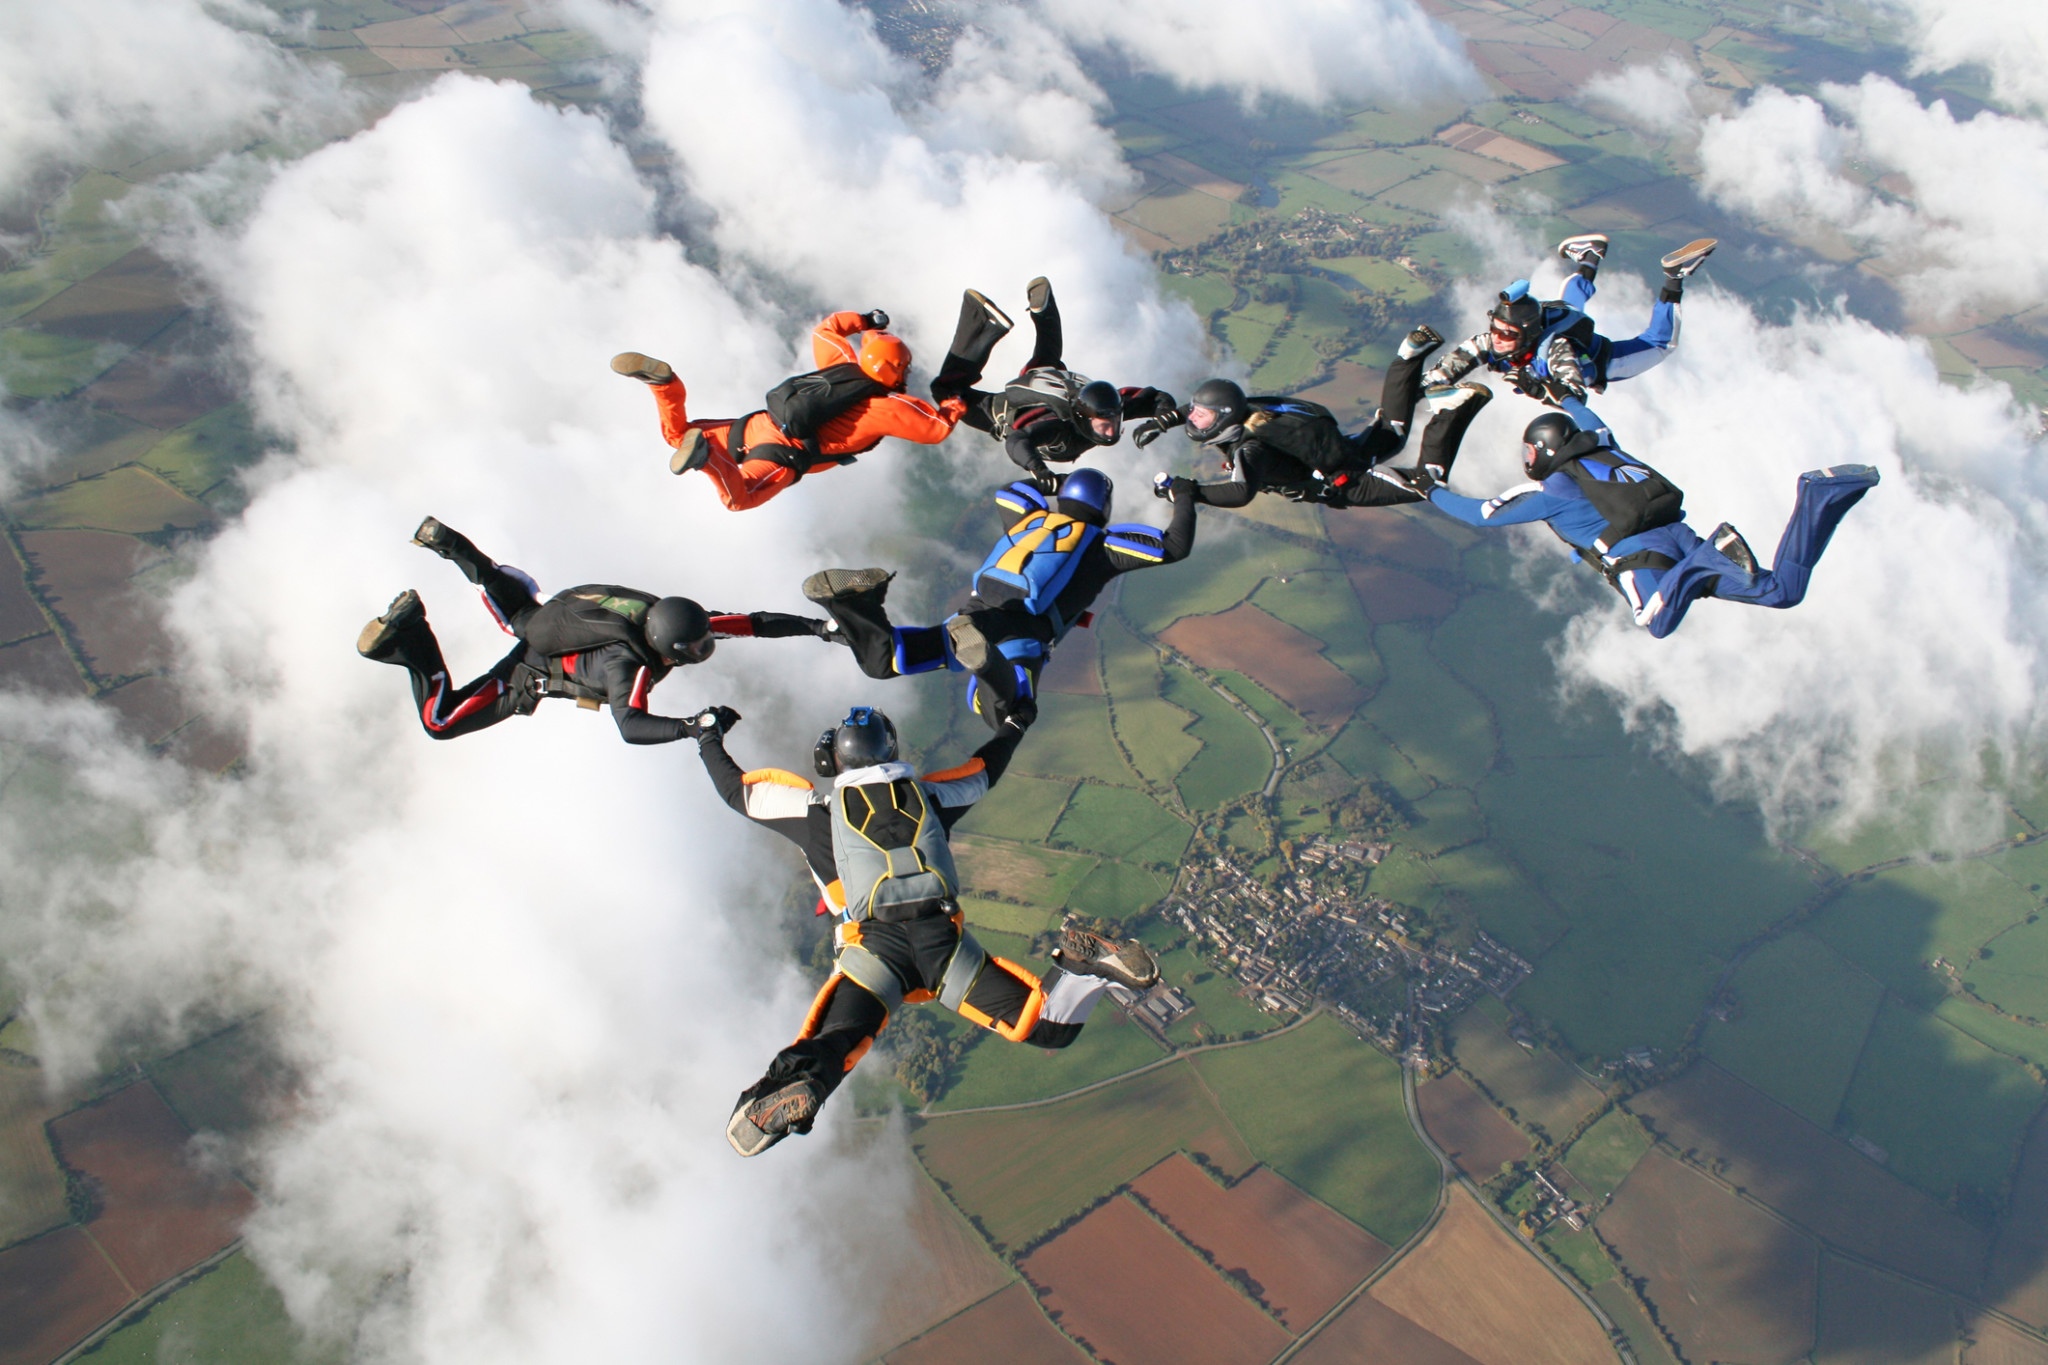 Insurance for Skydiving and Parachuting